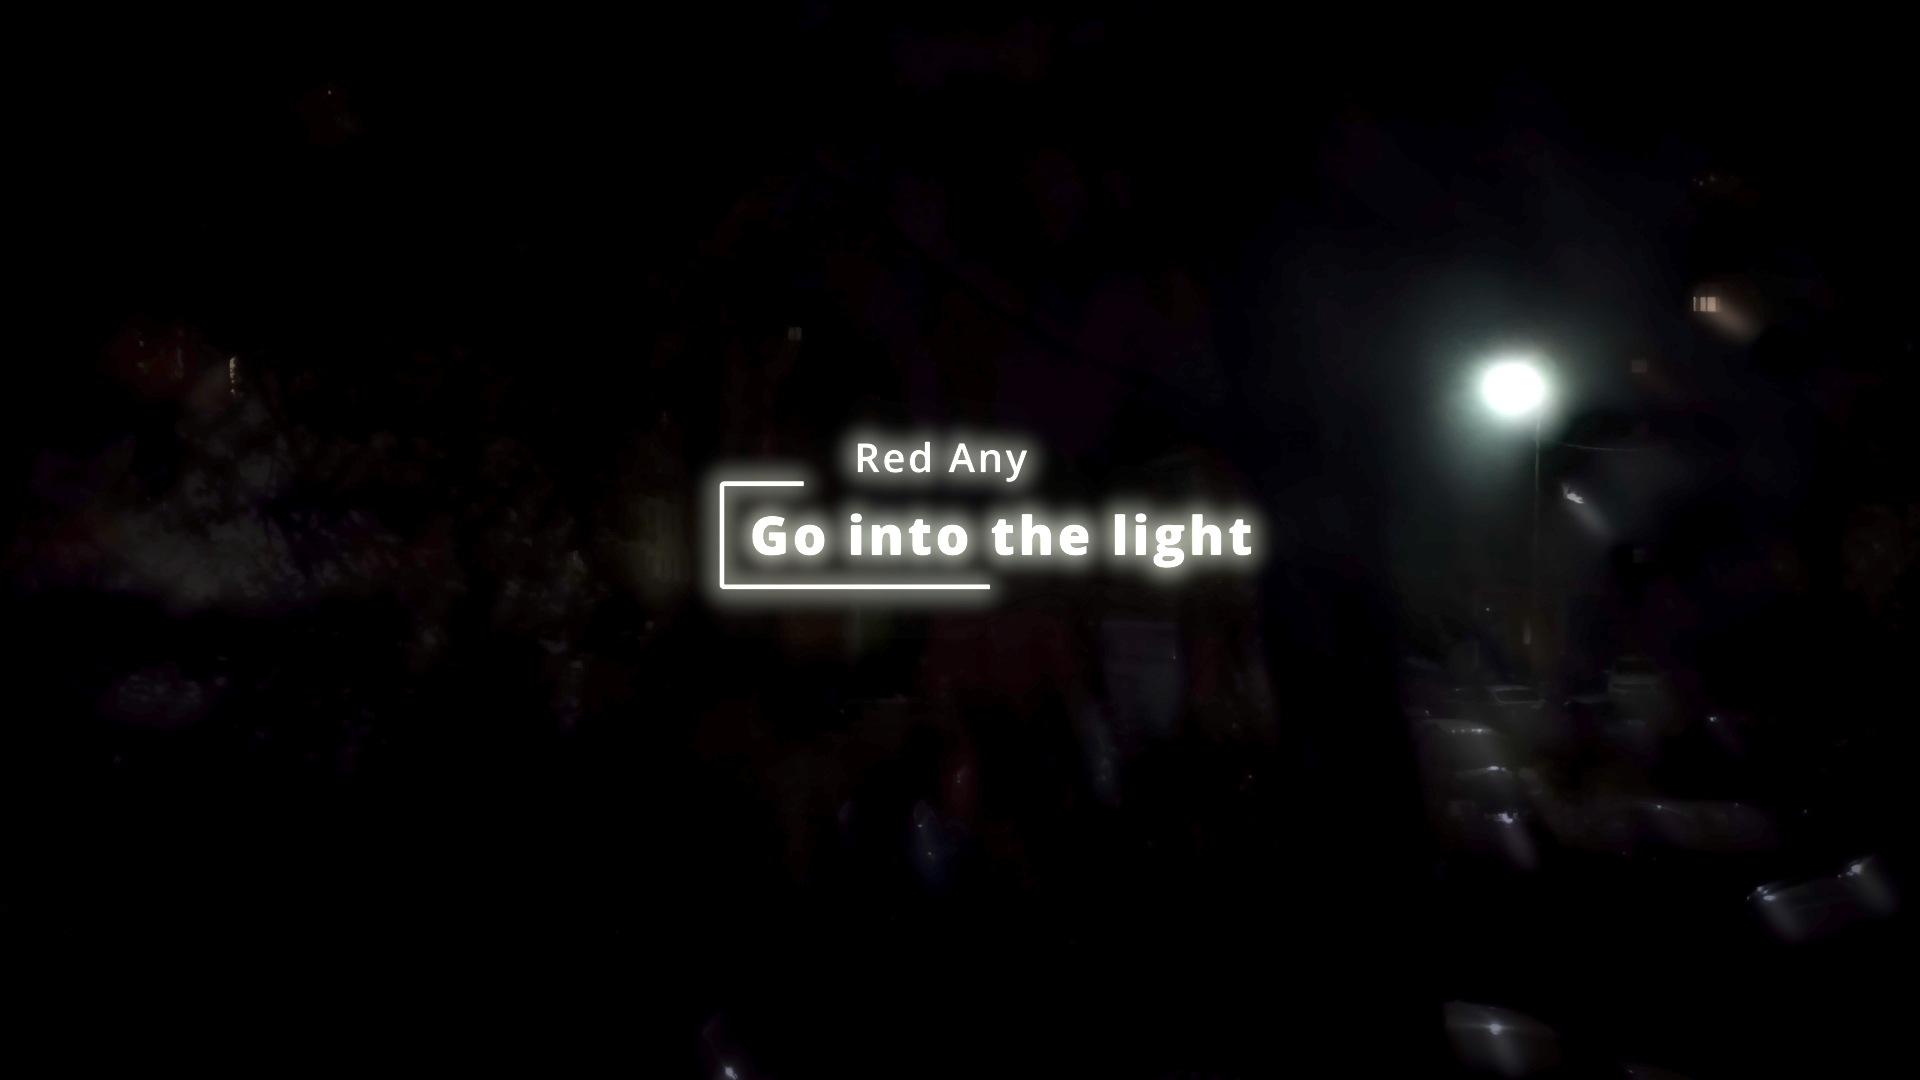 Red Any - Go into the light